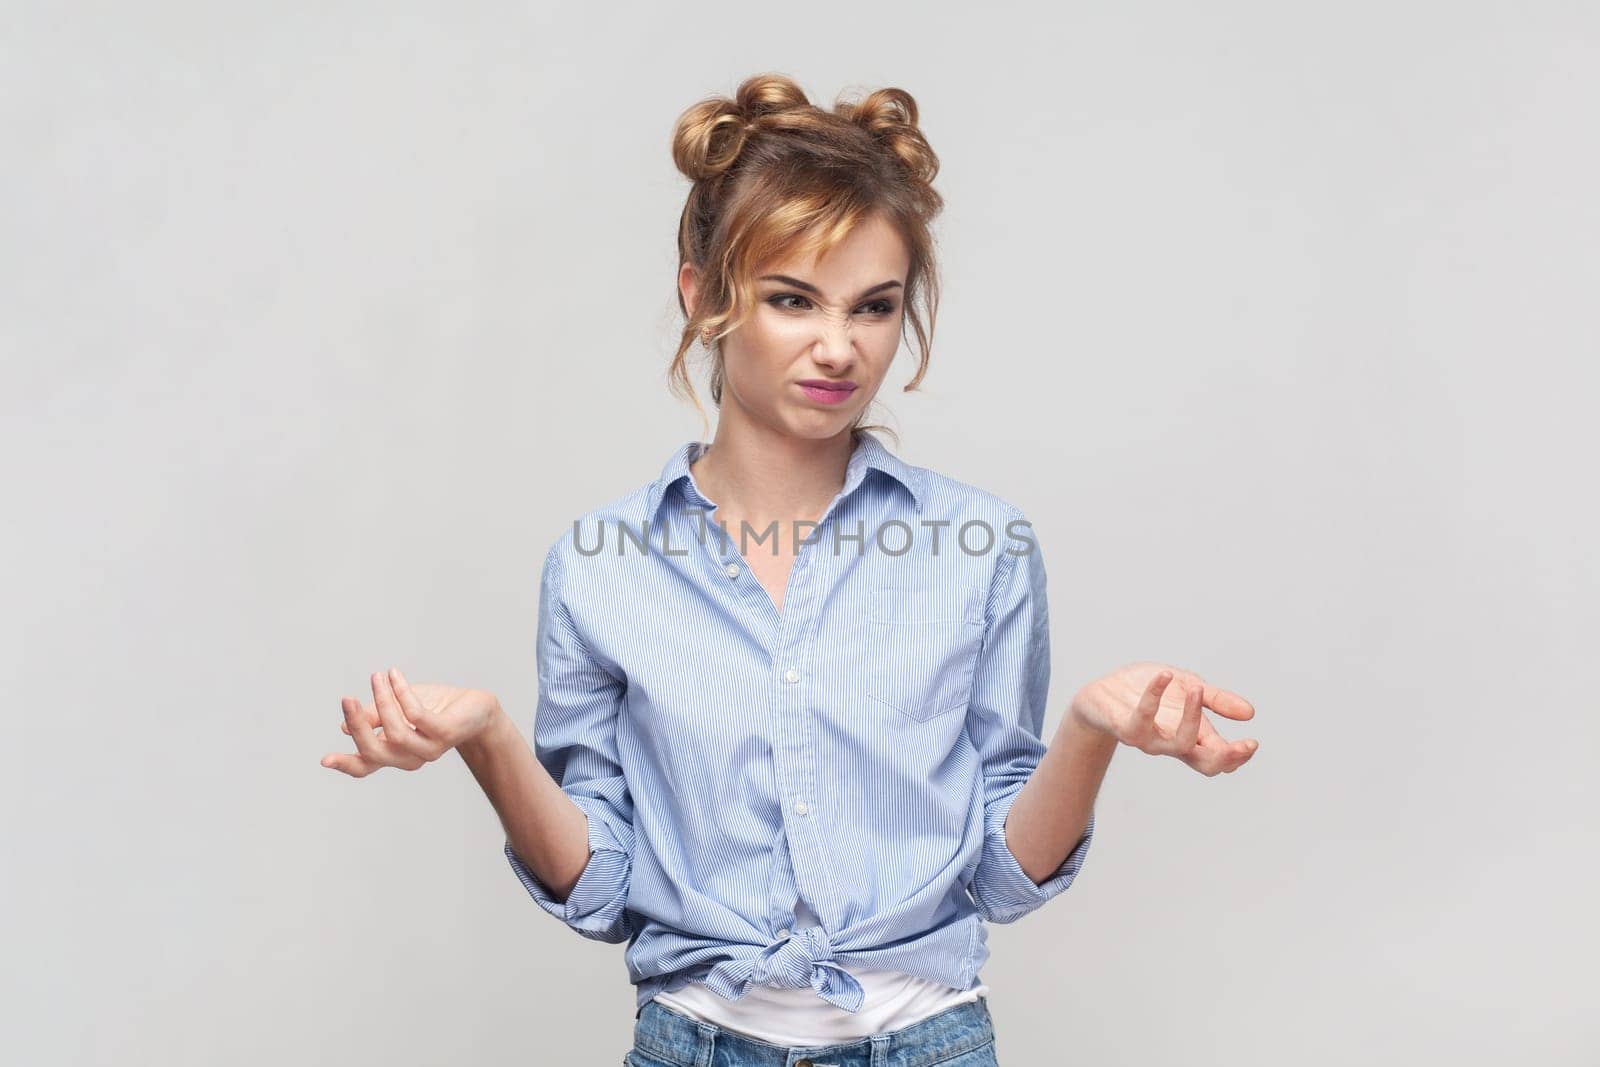 How could you. Portrait of annoyed indignant blonde woman spreads palms, smirks face, looks angrily at camera, quarrels with someone, feels puzzled. Indoor studio shot isolated on gray background.